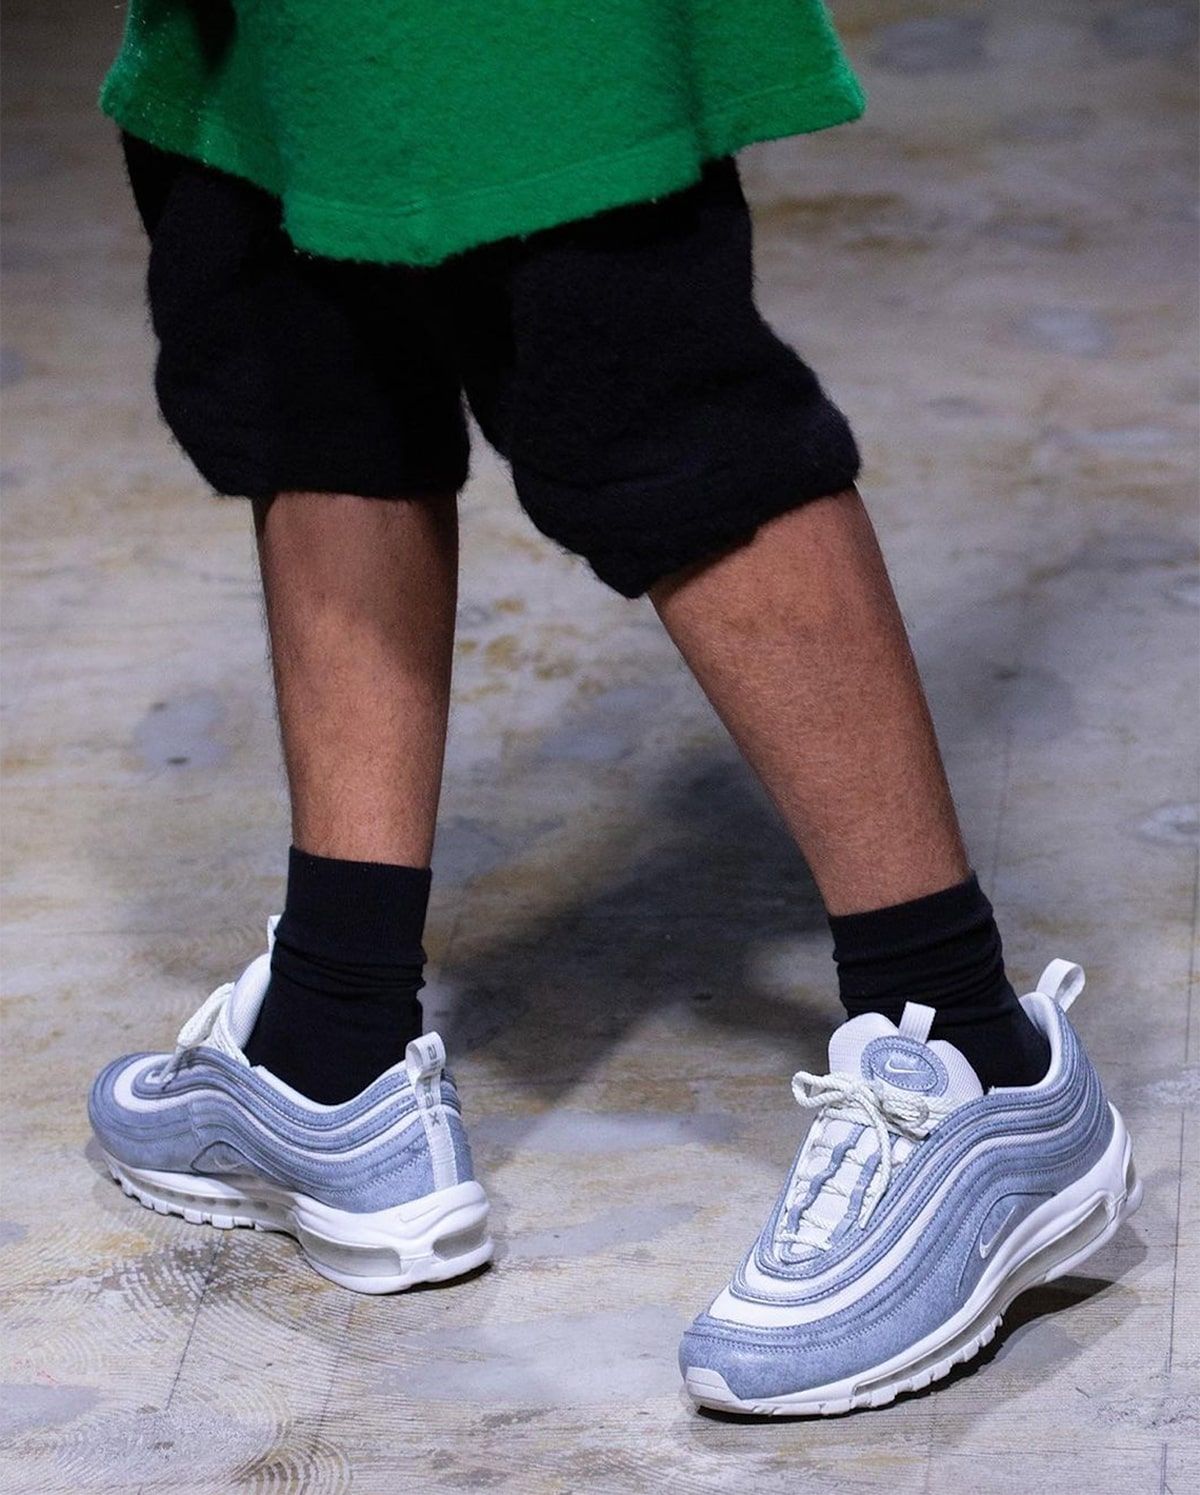 Where to Buy the COMME des GARÇONS x Nike Air Max 97 Collection